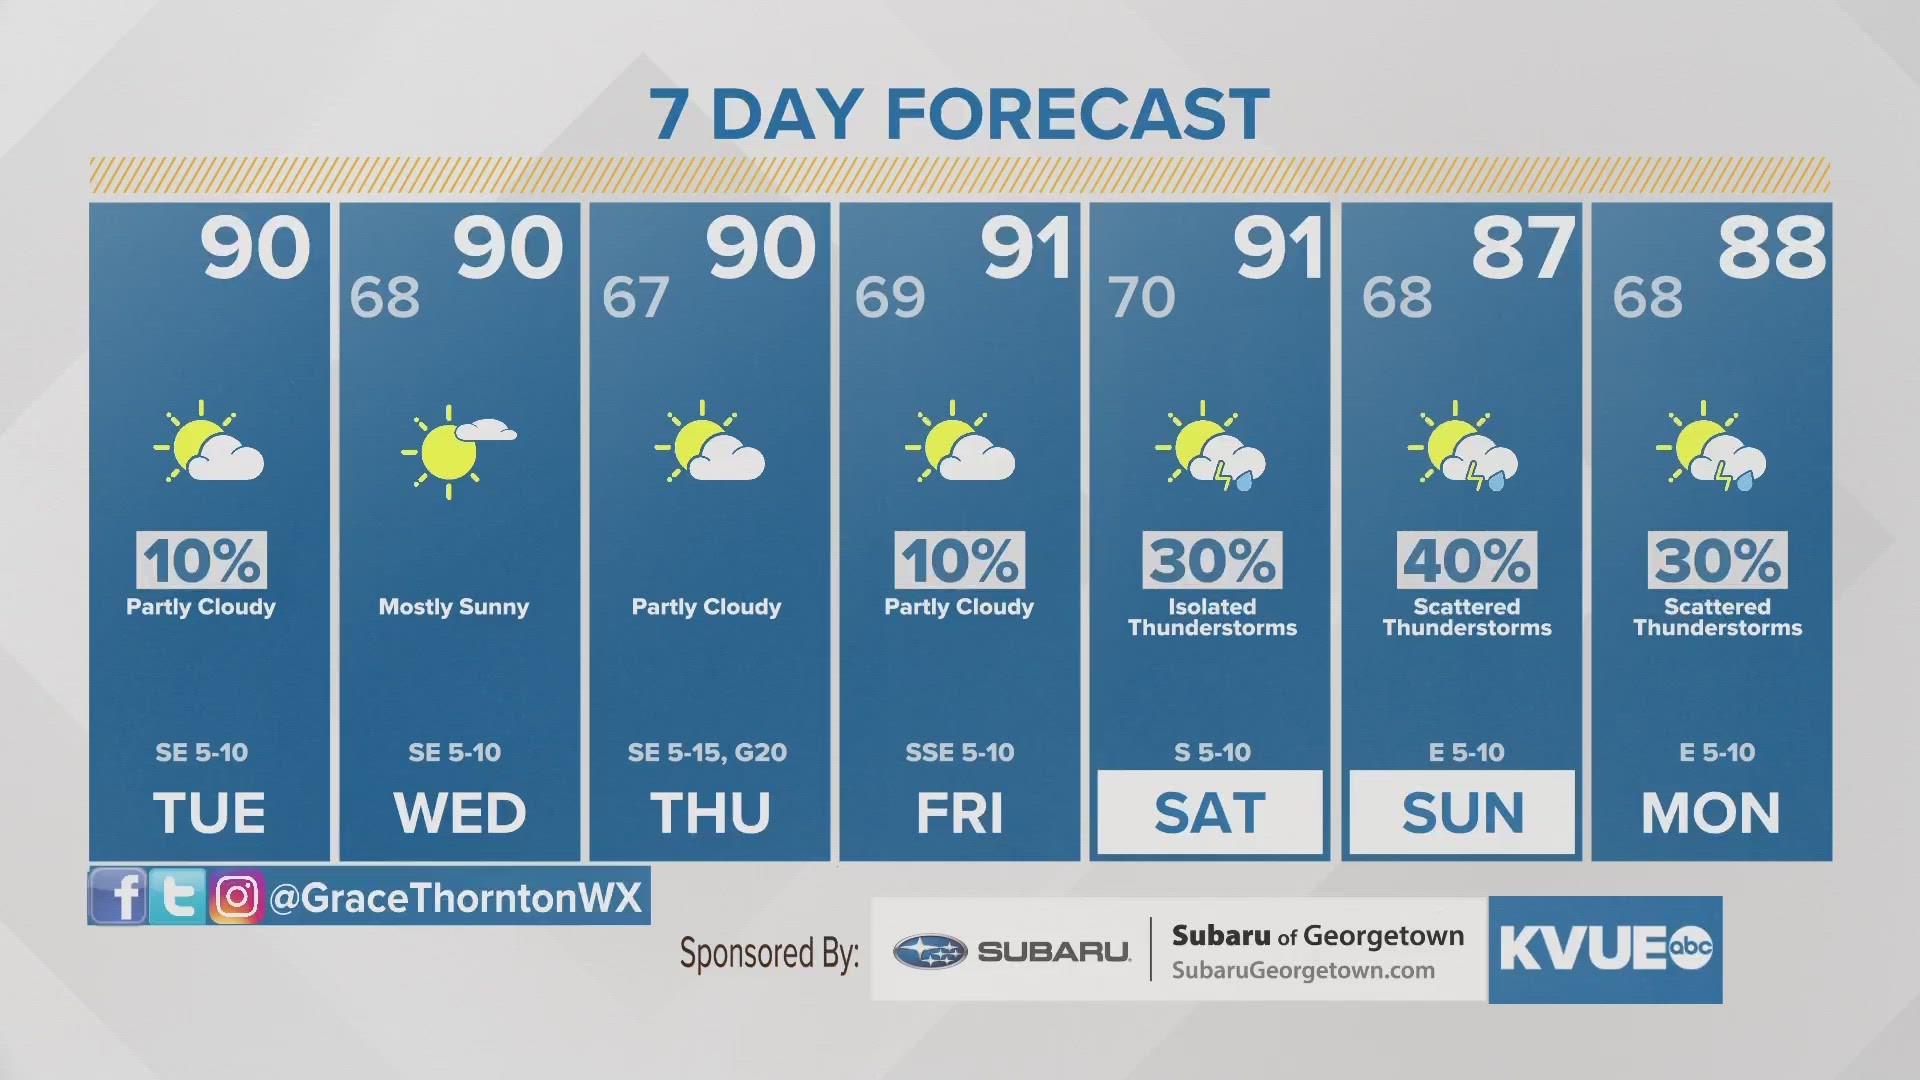 A chance for isolated storms along the seabreeze this afternoon. High temperatures are trending into the lower 90s for the rest of the work week.